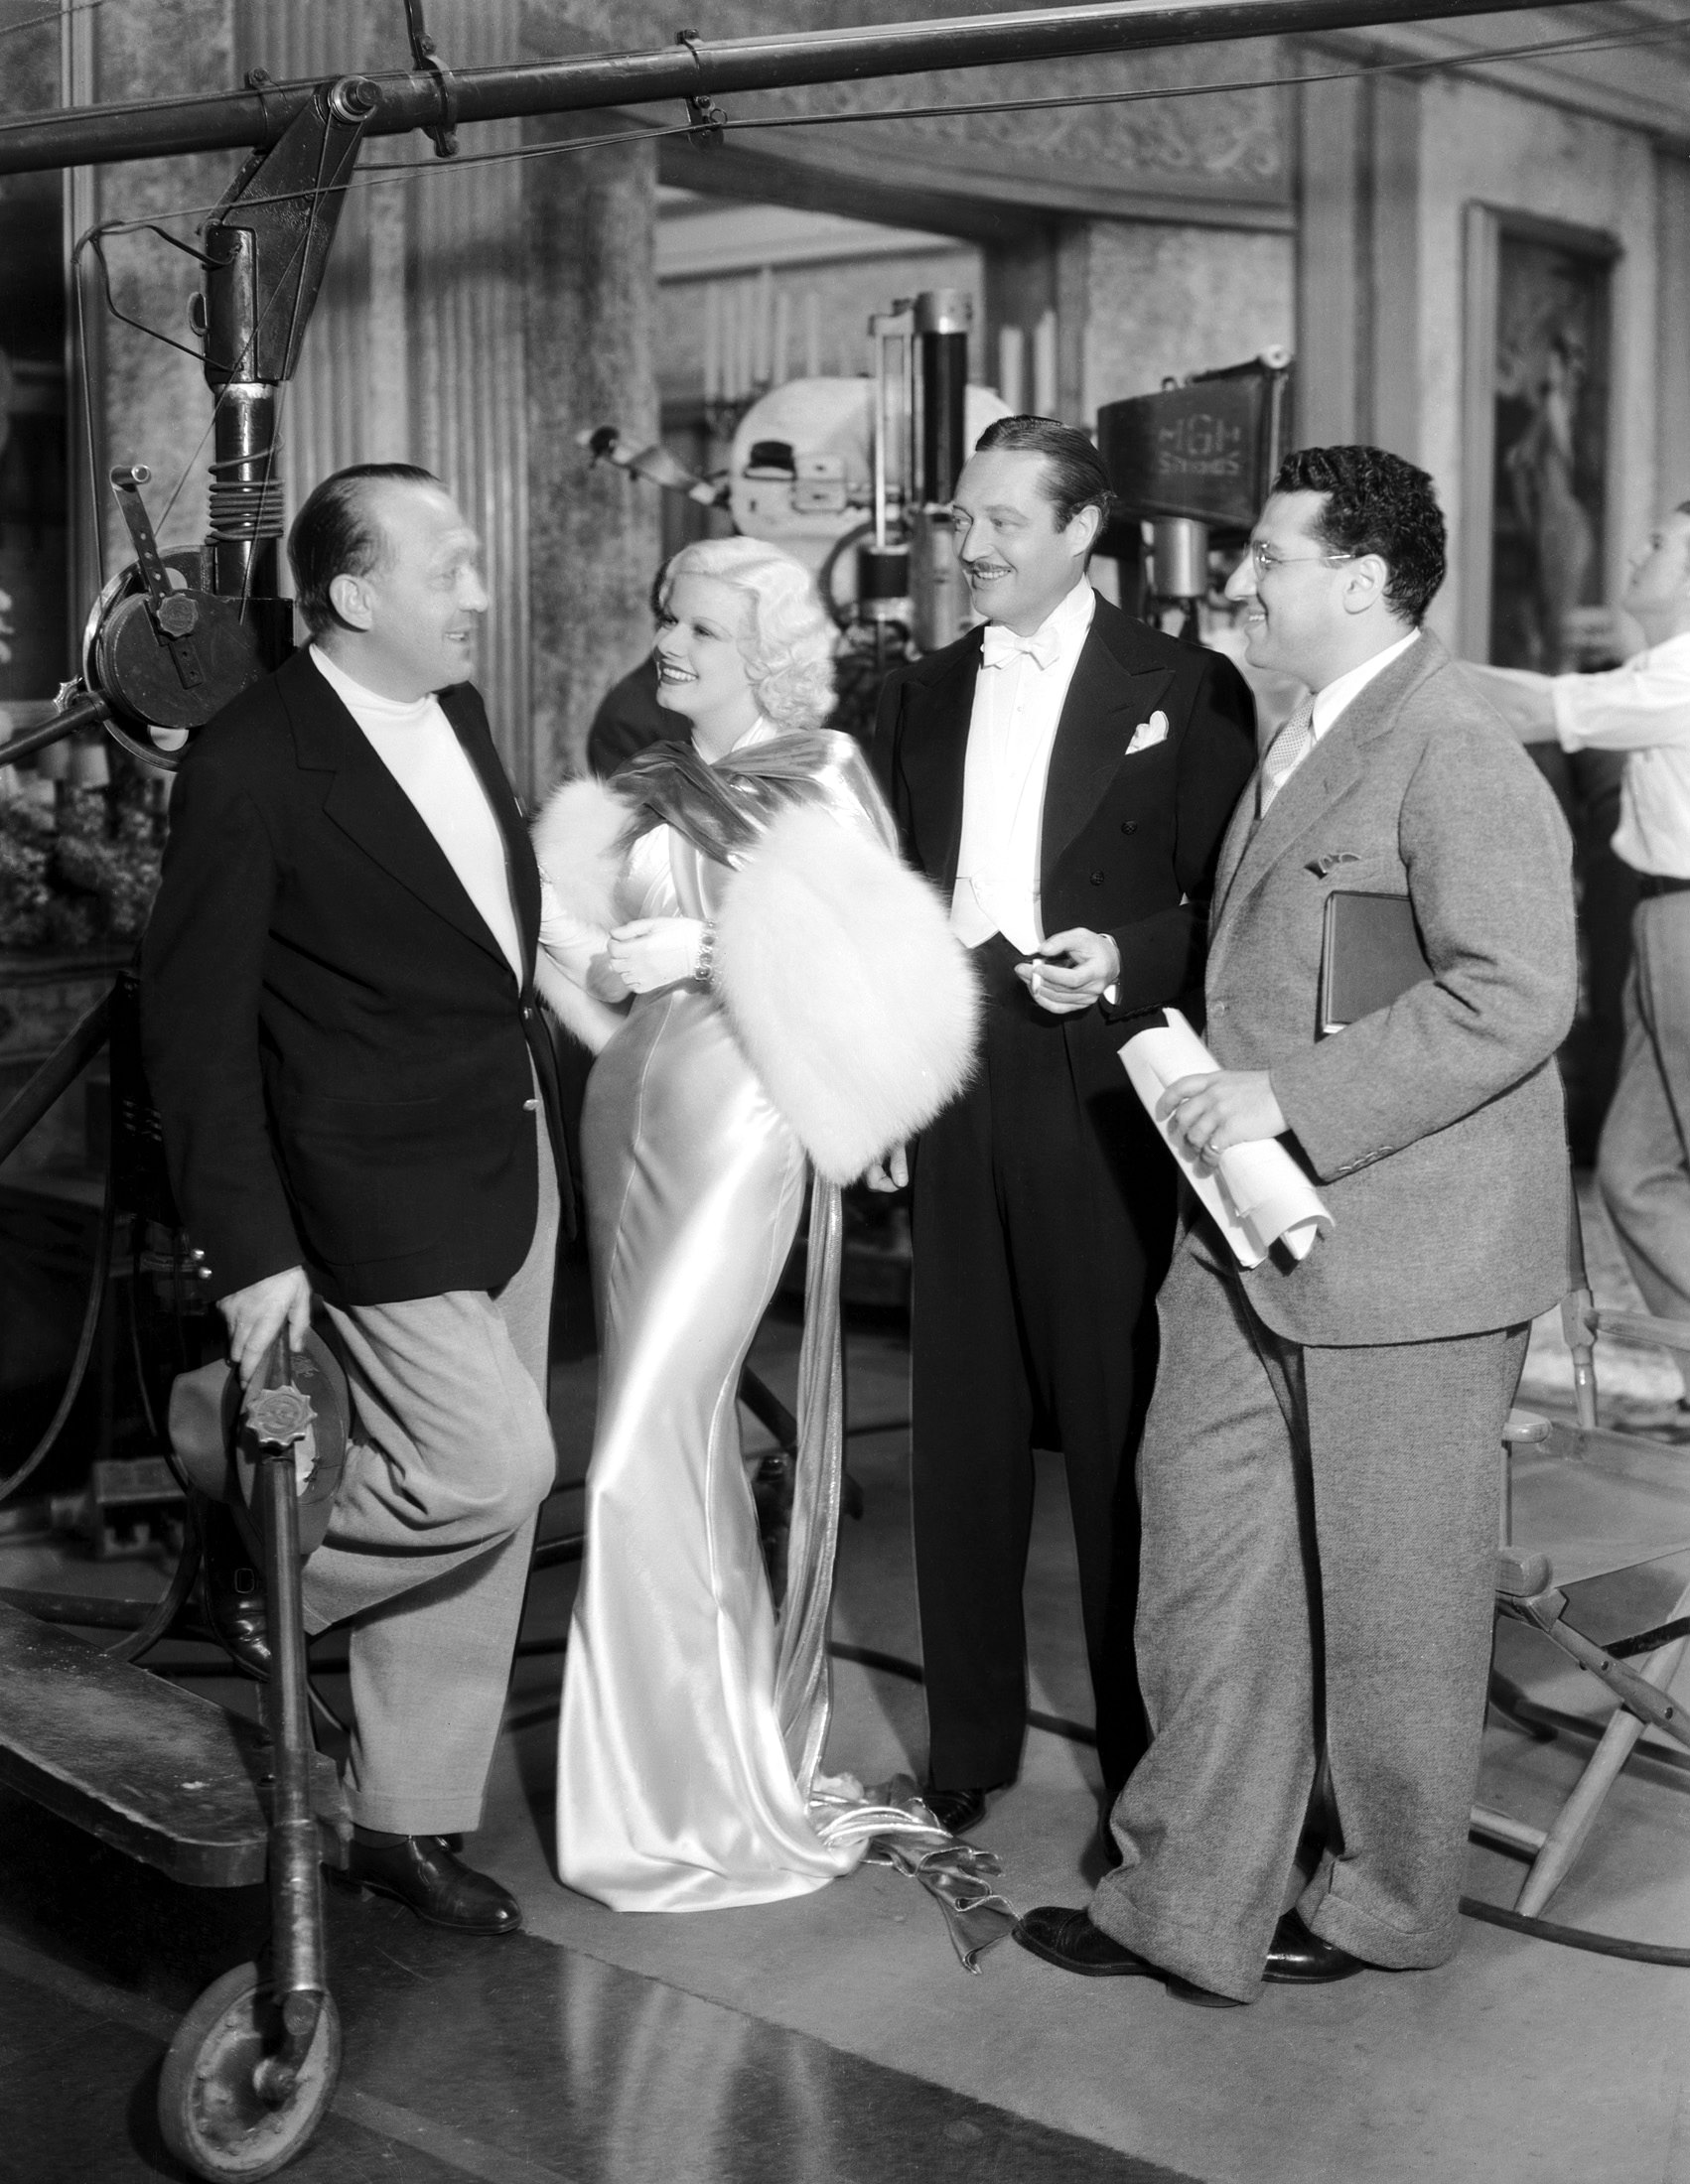 David O. Selznick, Jean Harlow, Edmund Lowe, and Director George Cuko prior to a scene in Dinner at Eight (1933).